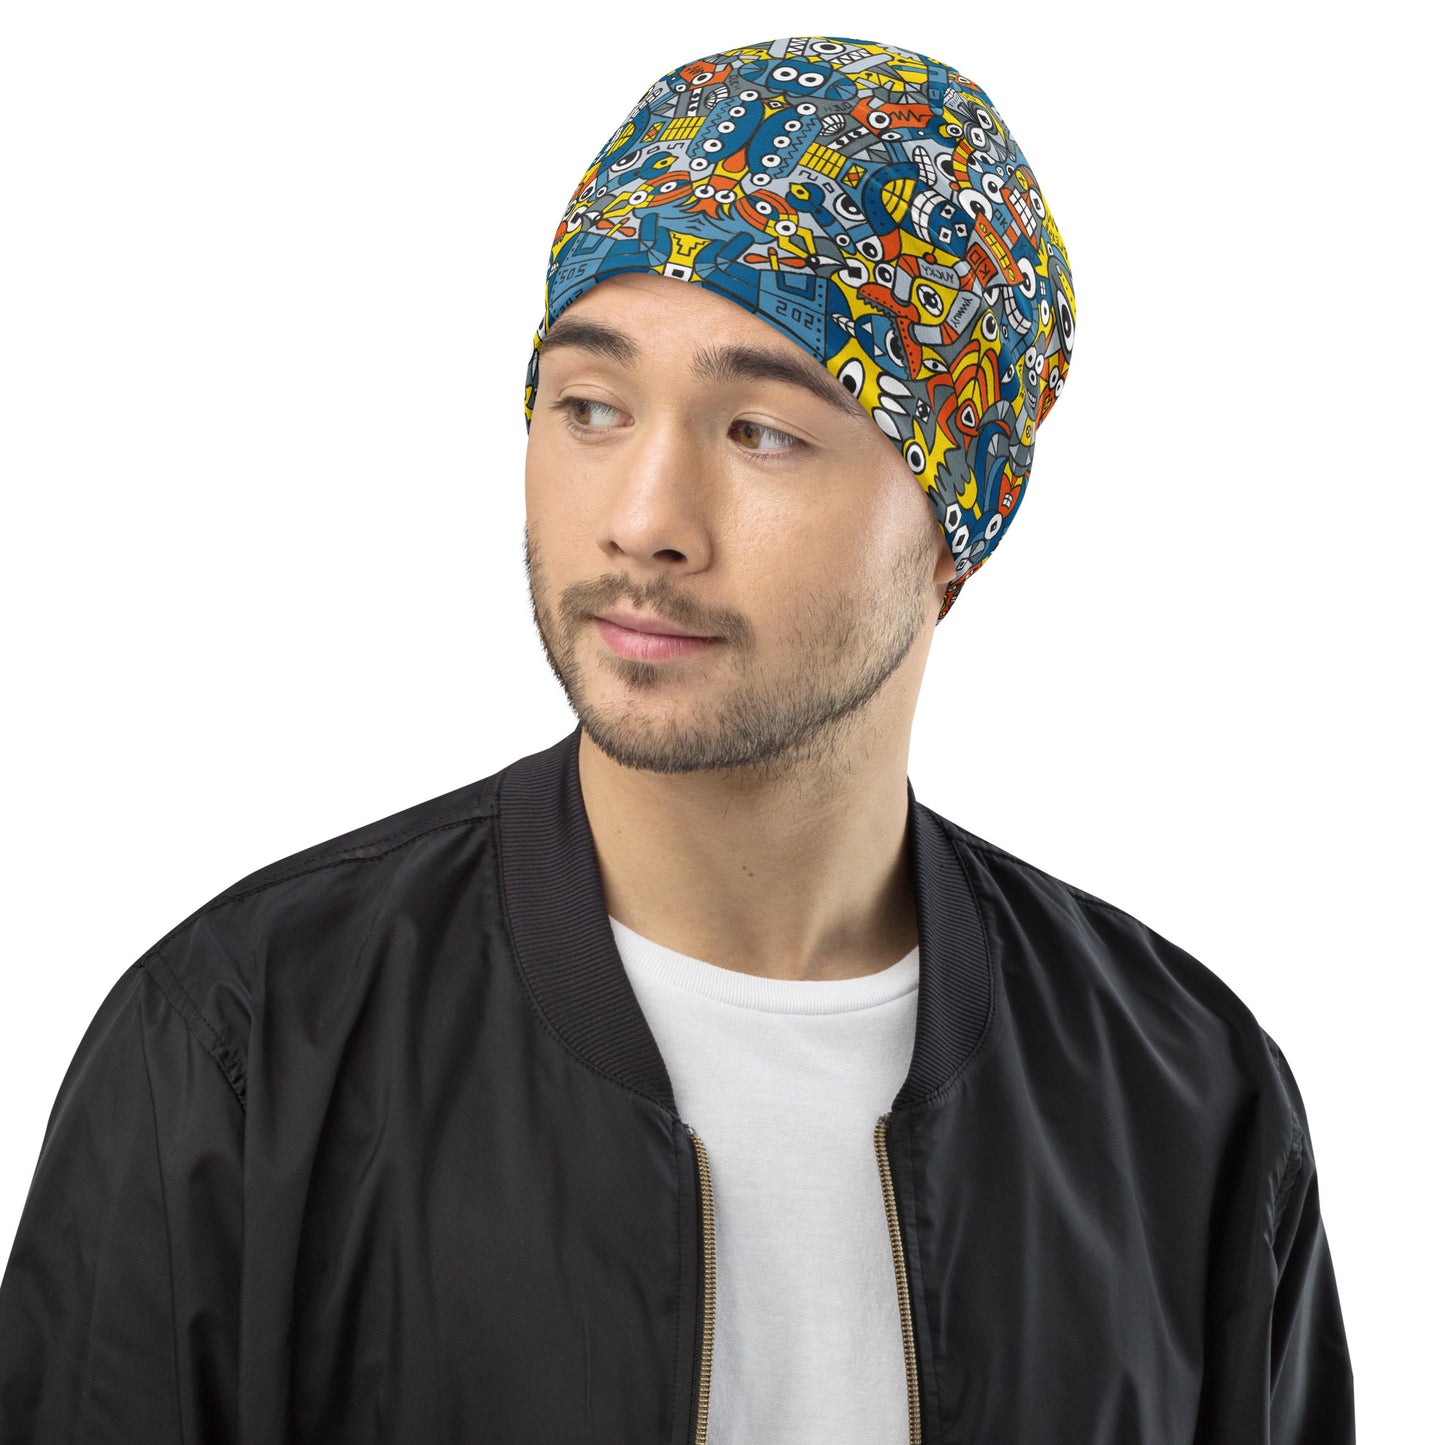 Retro robots doodle art All-Over Print Beanie. Side view